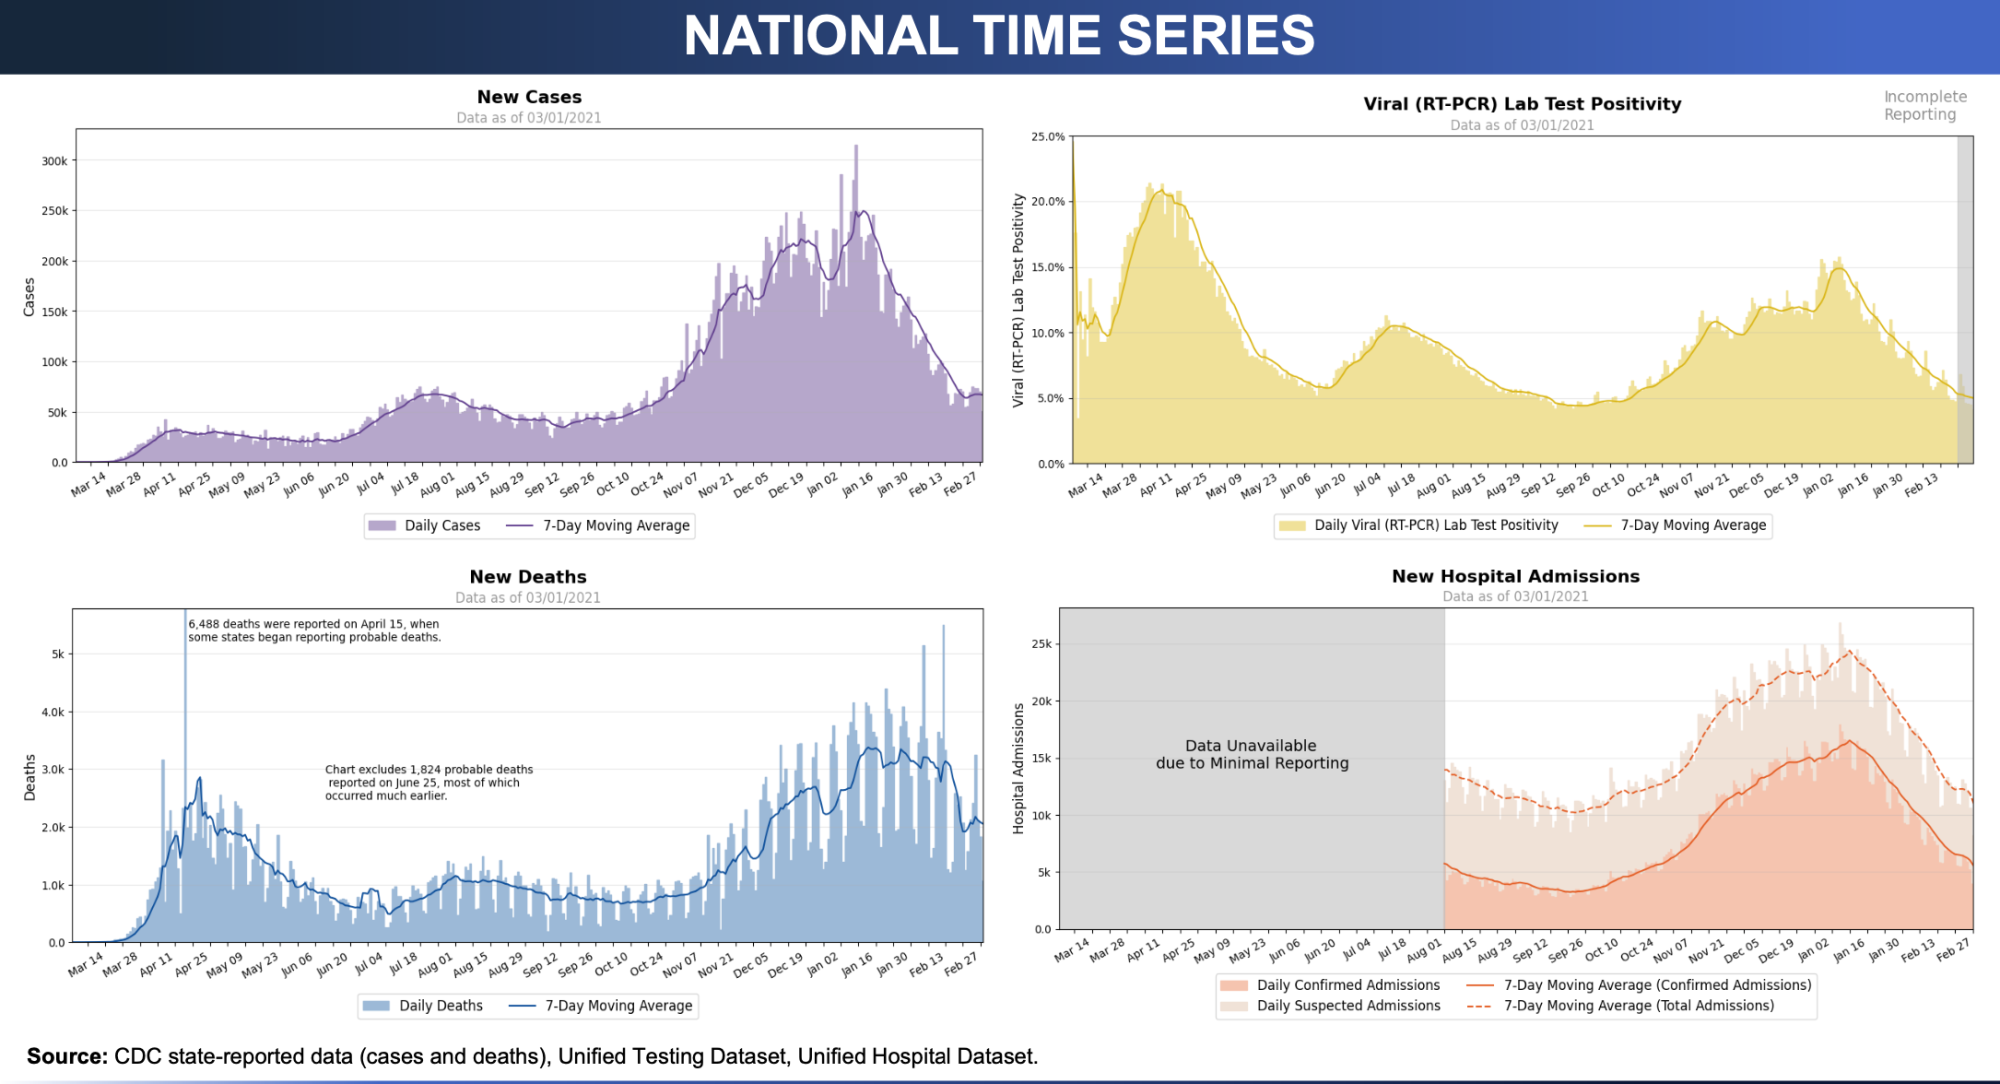 Four-panel chart from the federal Community Profile Reports in which each panel charts a time series of COVID-19 data: Daily Cases, Daily Test Positivity, Daily Deaths, and Daily Hospital Admissions (confirmed and suspected).